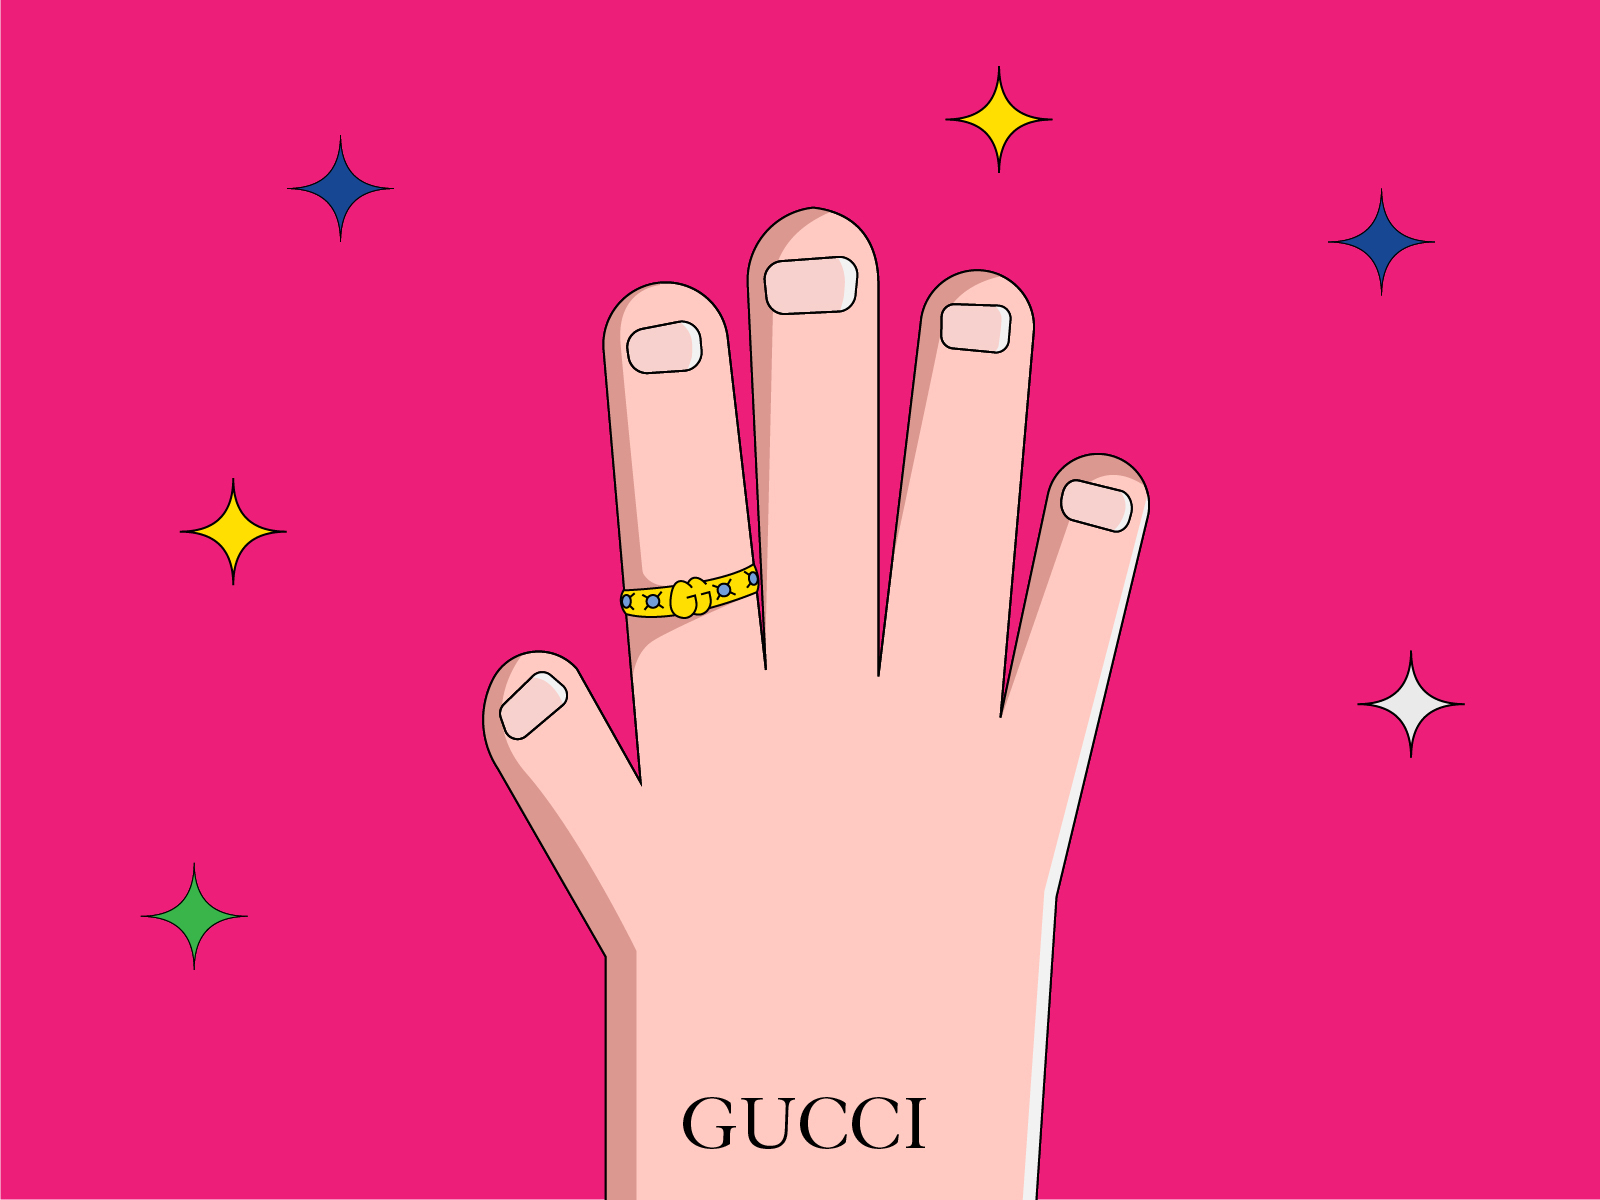 Gucci Gold Ring in illustration by Zaid Hilmi on Dribbble